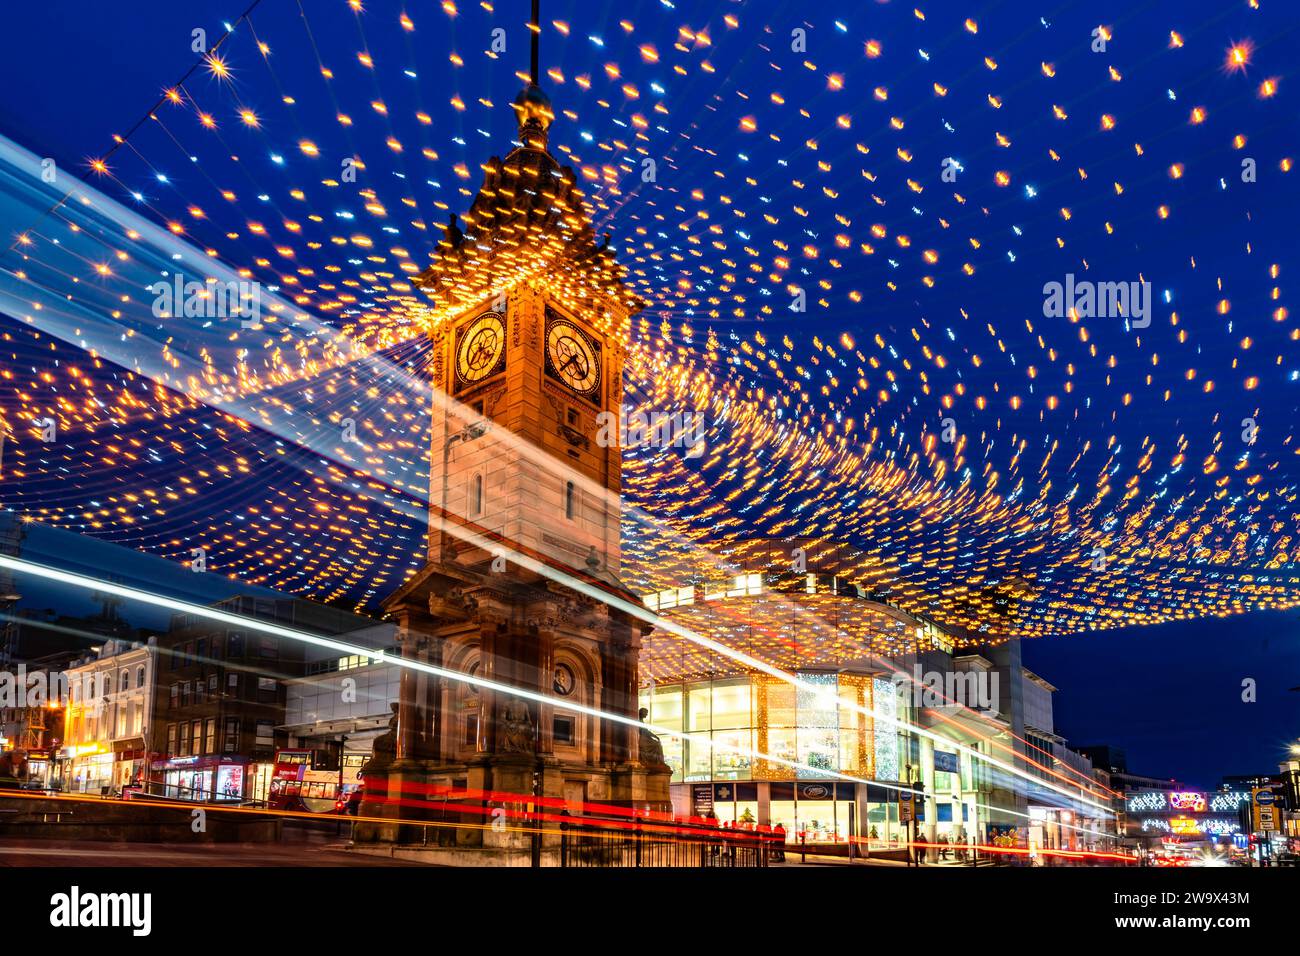 Brighton, East Sussex, UK  30 December 2023. The Jubilee Clock tower is shrowded in Christmas lights that are flickering and blowing around in the stormy weather as the traffic surrounds the area and shoppers are looking for sale bargains in this busy town on the south coast.©Sarah Mott / Alamy Live News. Stock Photo